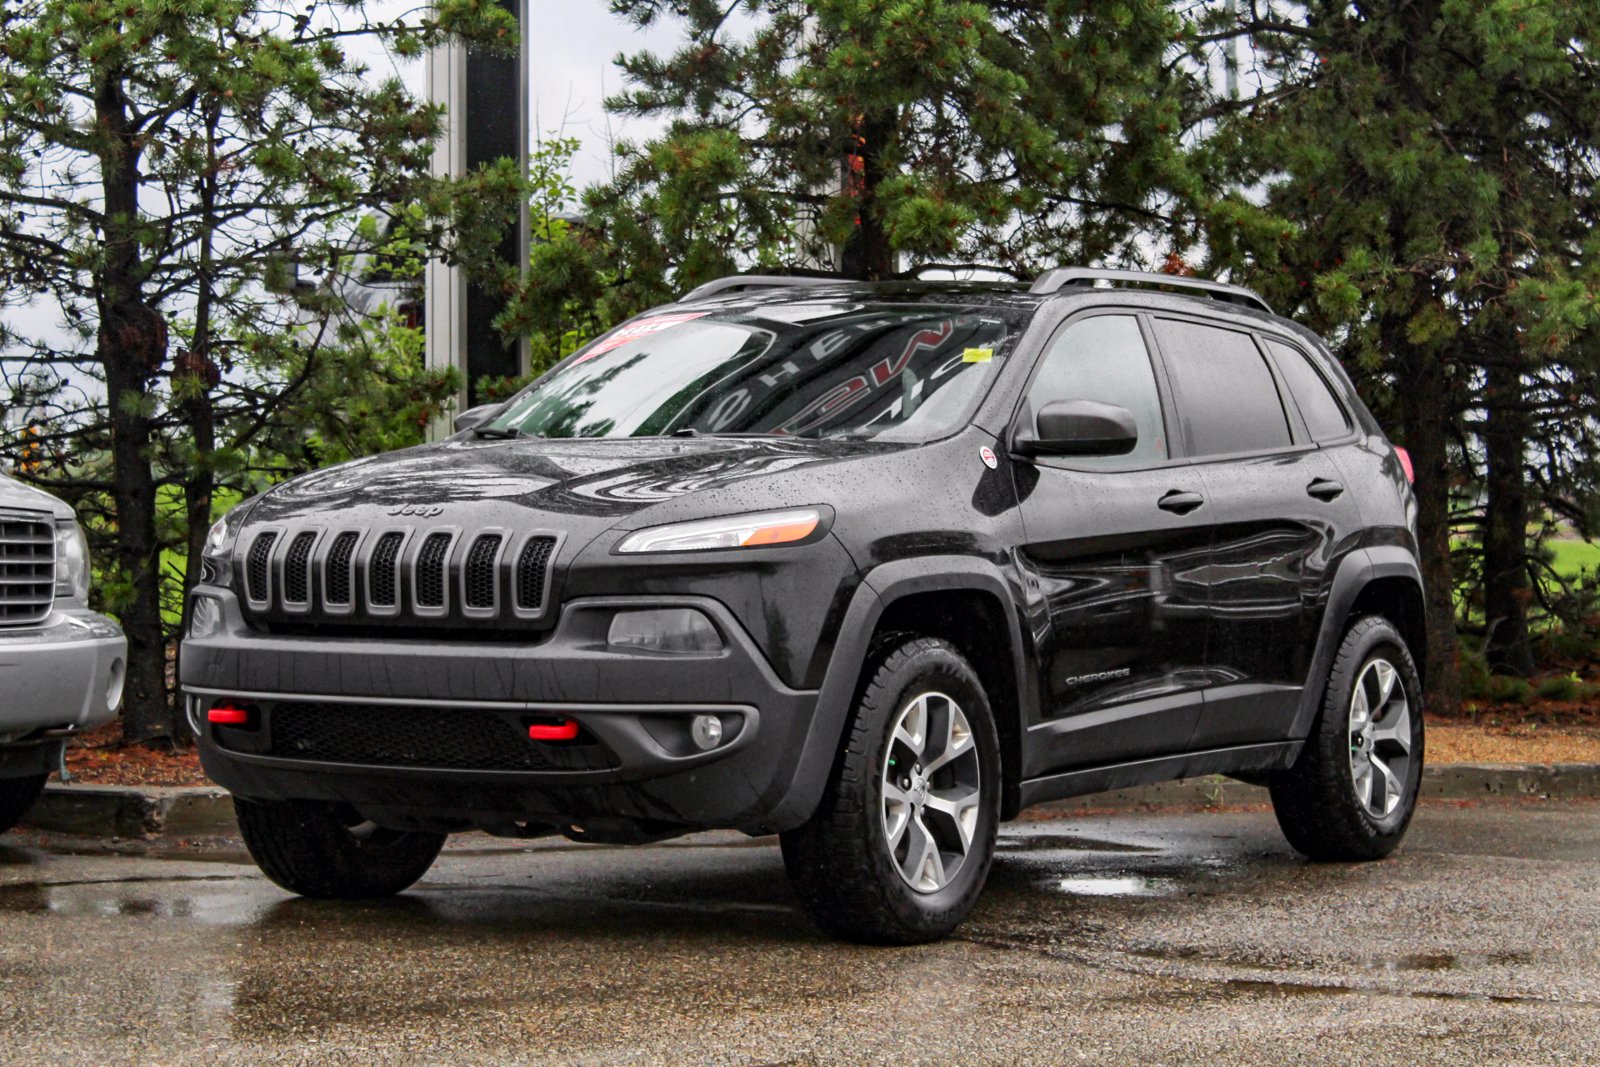 Pre Owned 2014 Jeep Cherokee Trailhawk V6 4x4 4wd Sport Utility